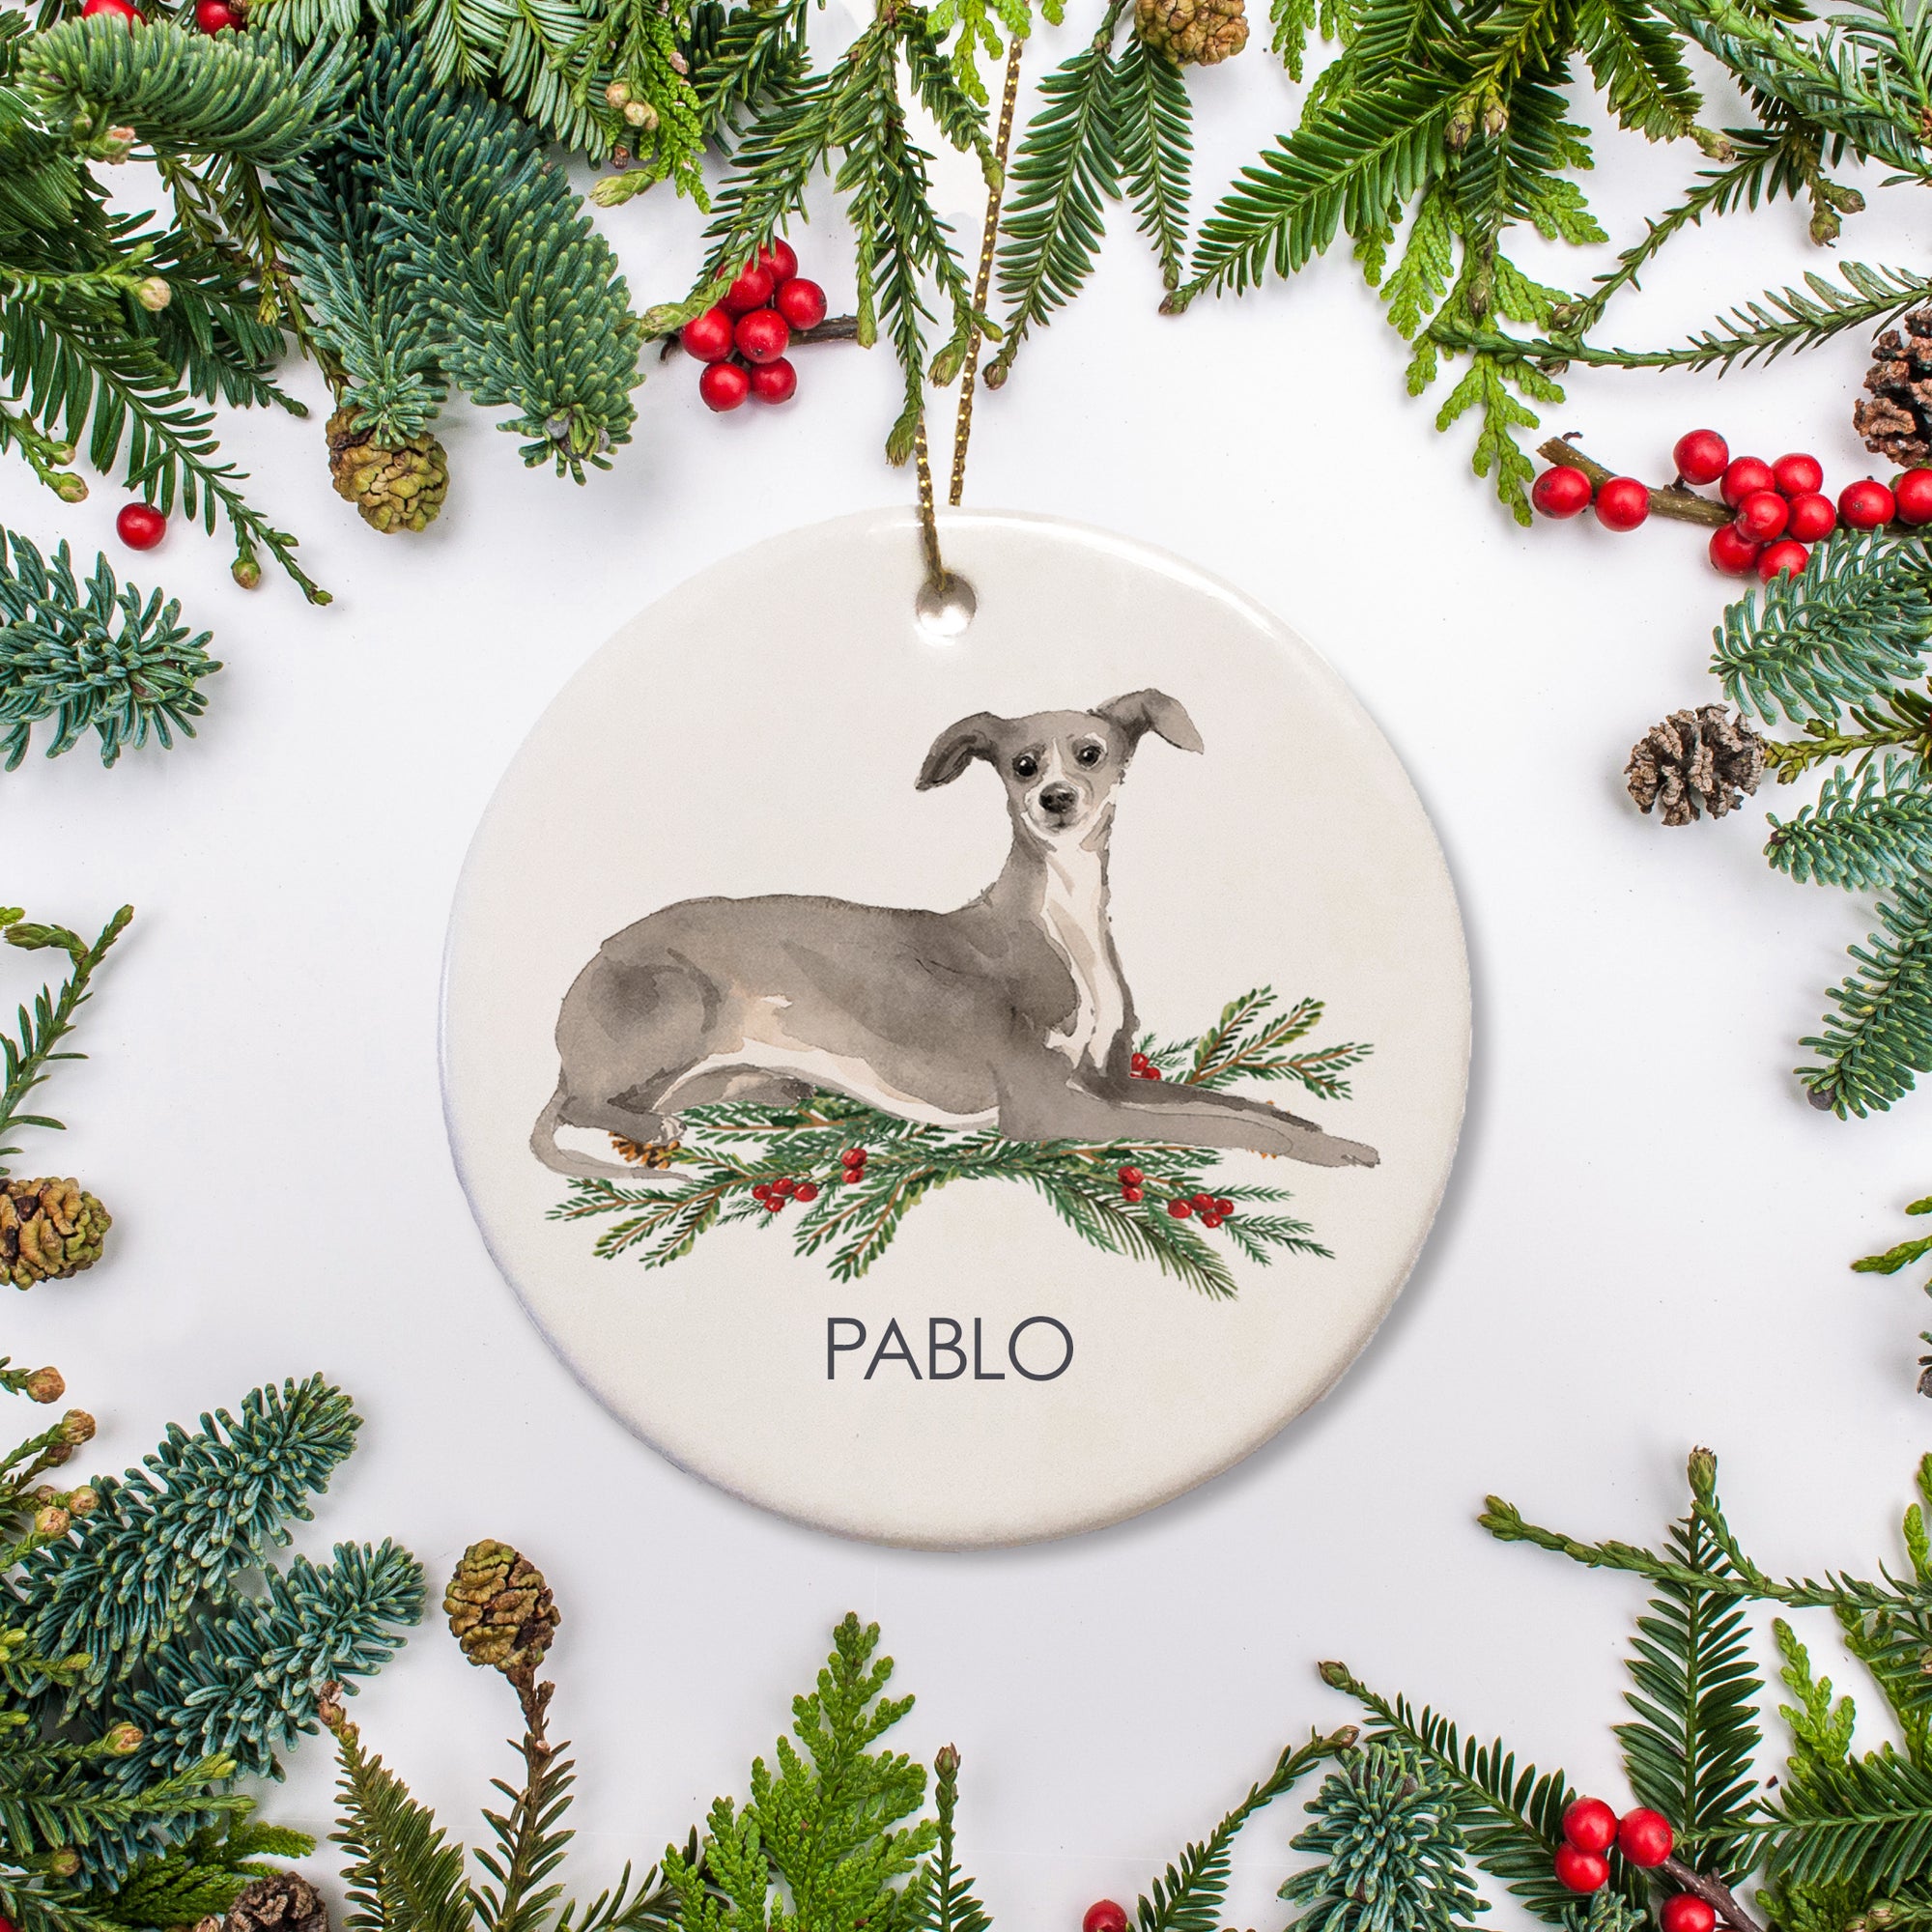 This Christmas ornament showcases your Italian Greyhound with a custom name.It's a great way to include your pet on the family Christmas tree.